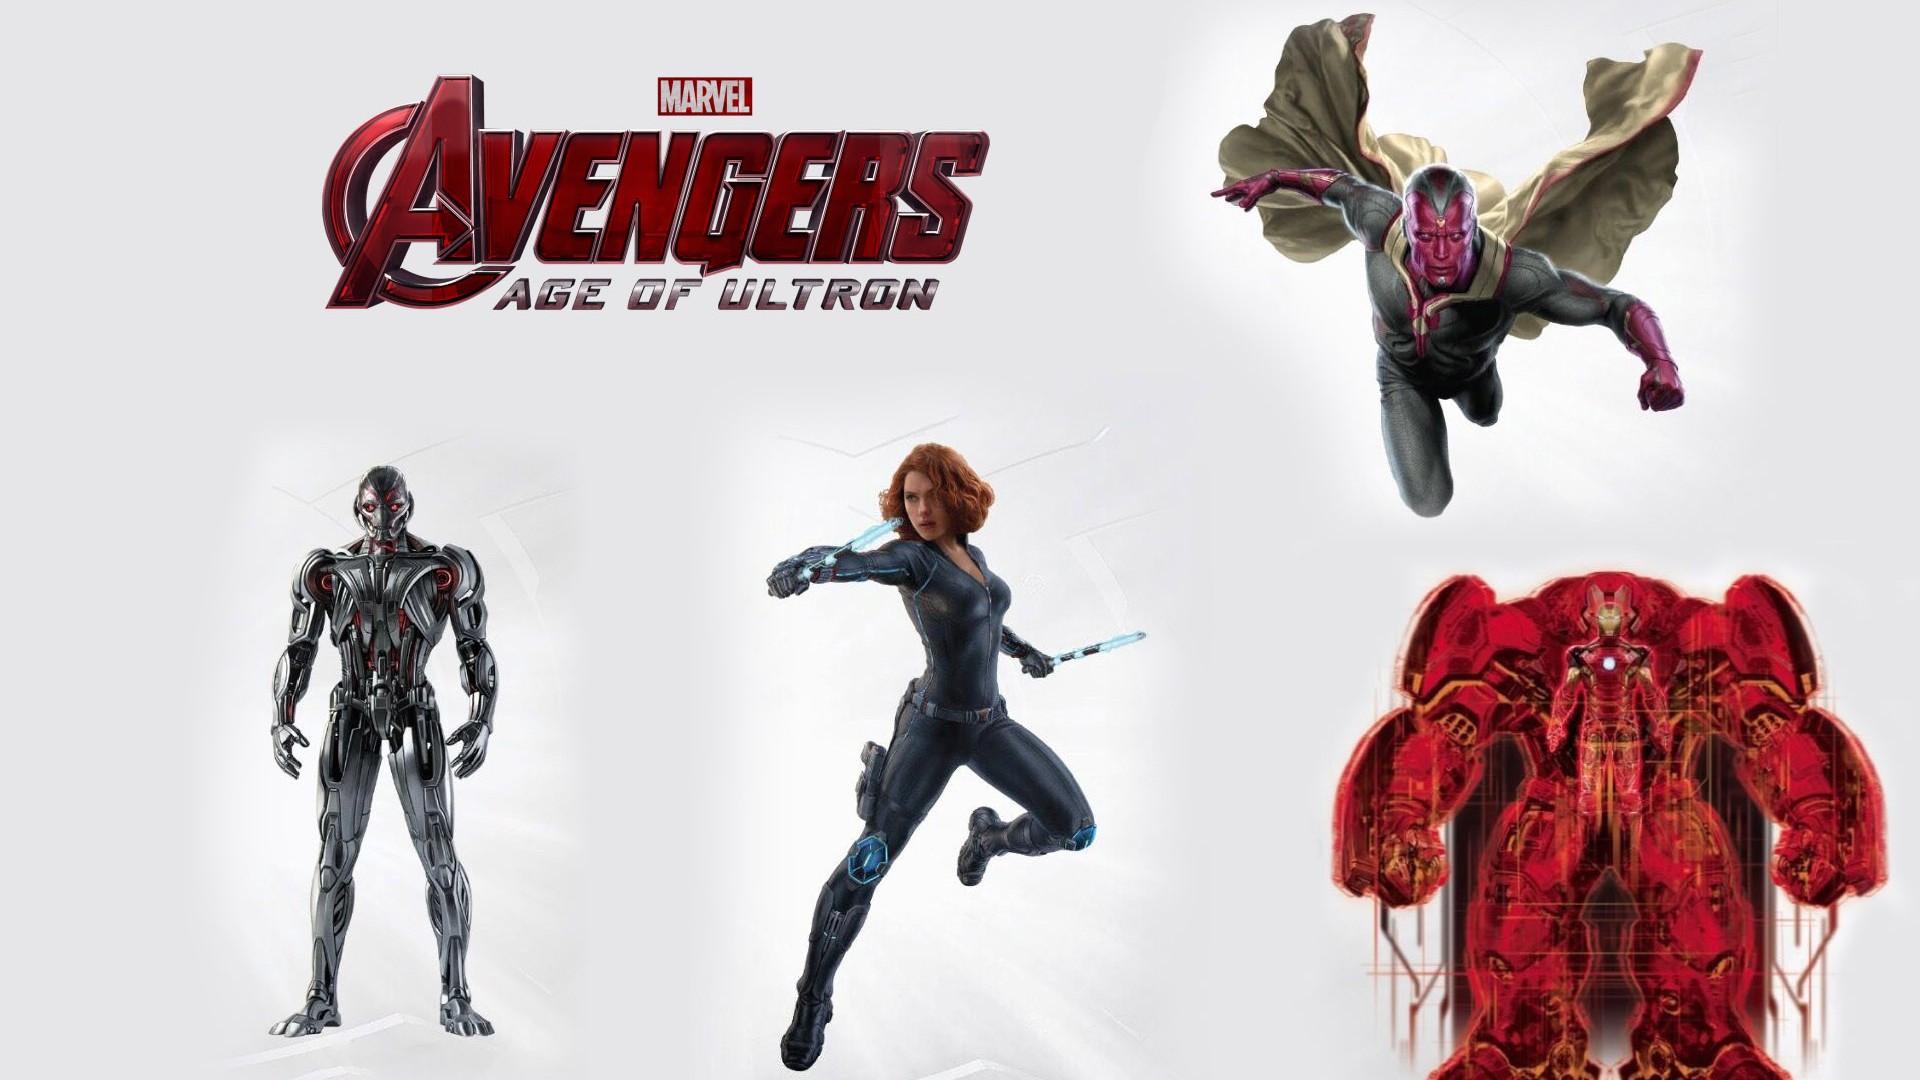 Avengers Age Of Ultron Marvel Poster HD Wallpaper Search more high